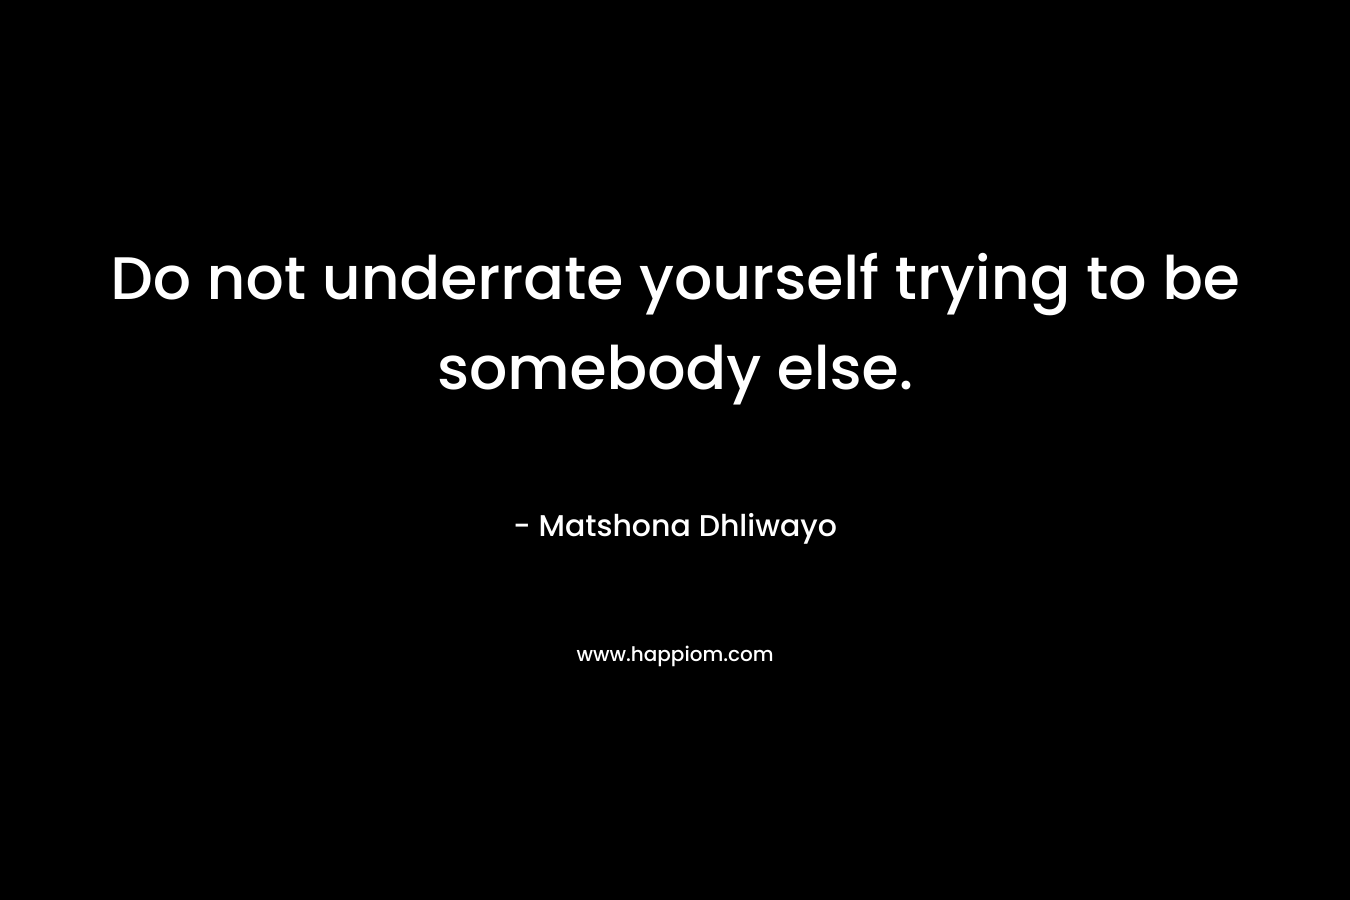 Do not underrate yourself trying to be somebody else.